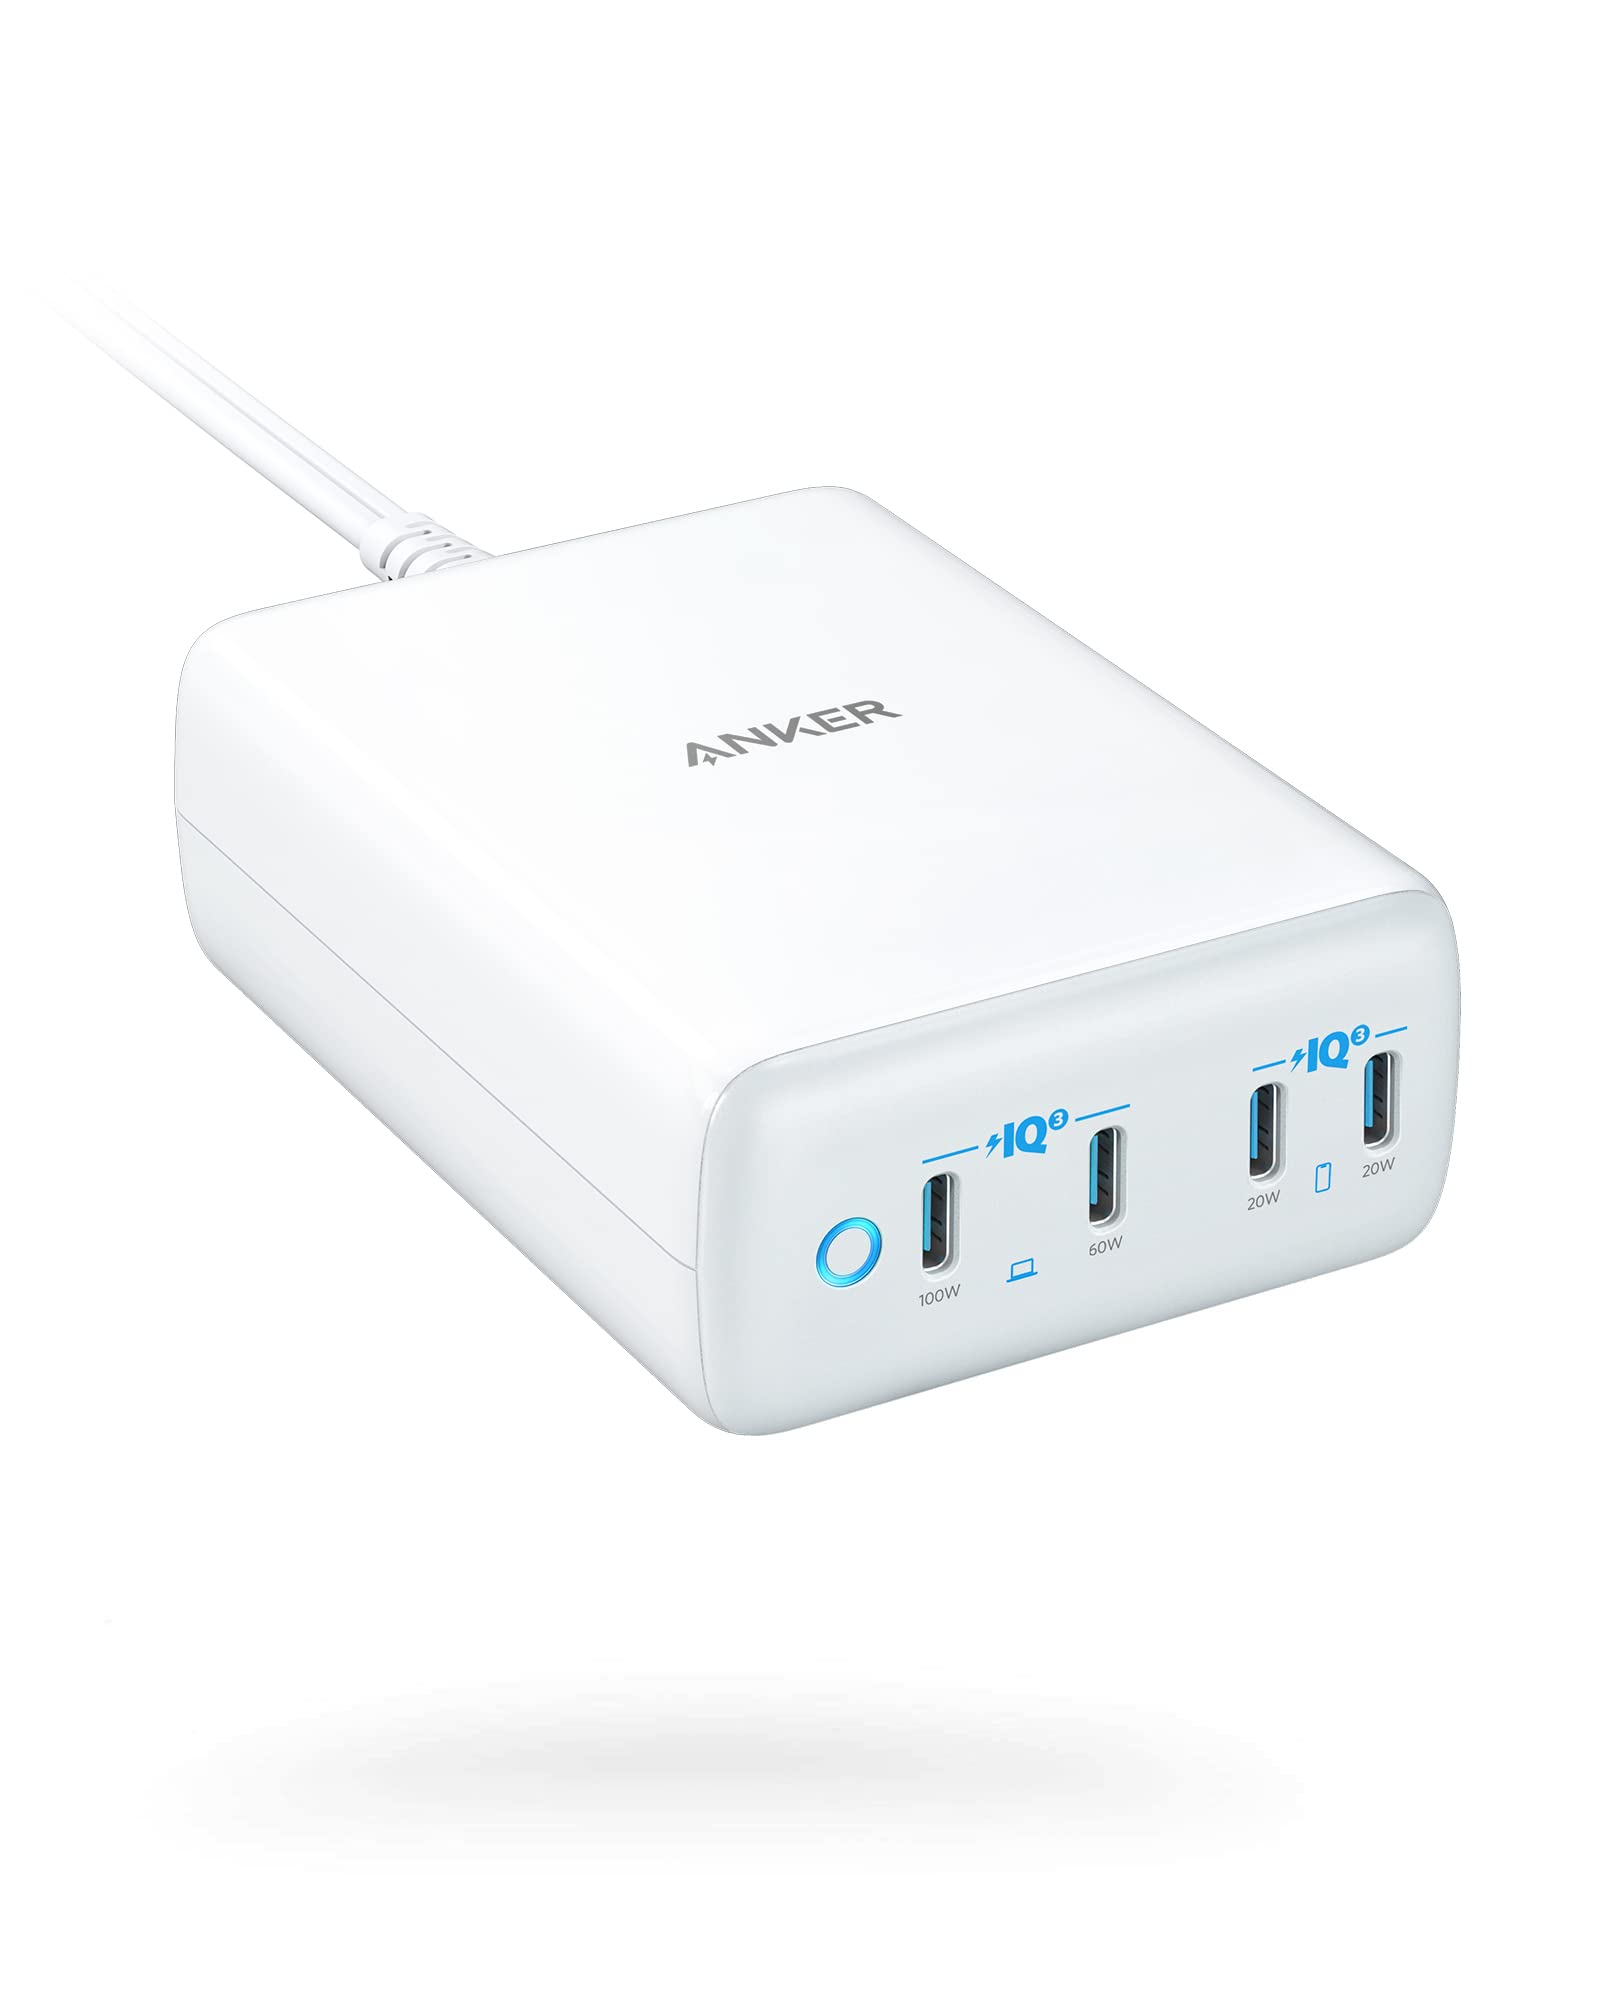 Anker USB C 120W, 547 Charger, PowerPort III 4-Port Charging Station $60 + Free Shipping